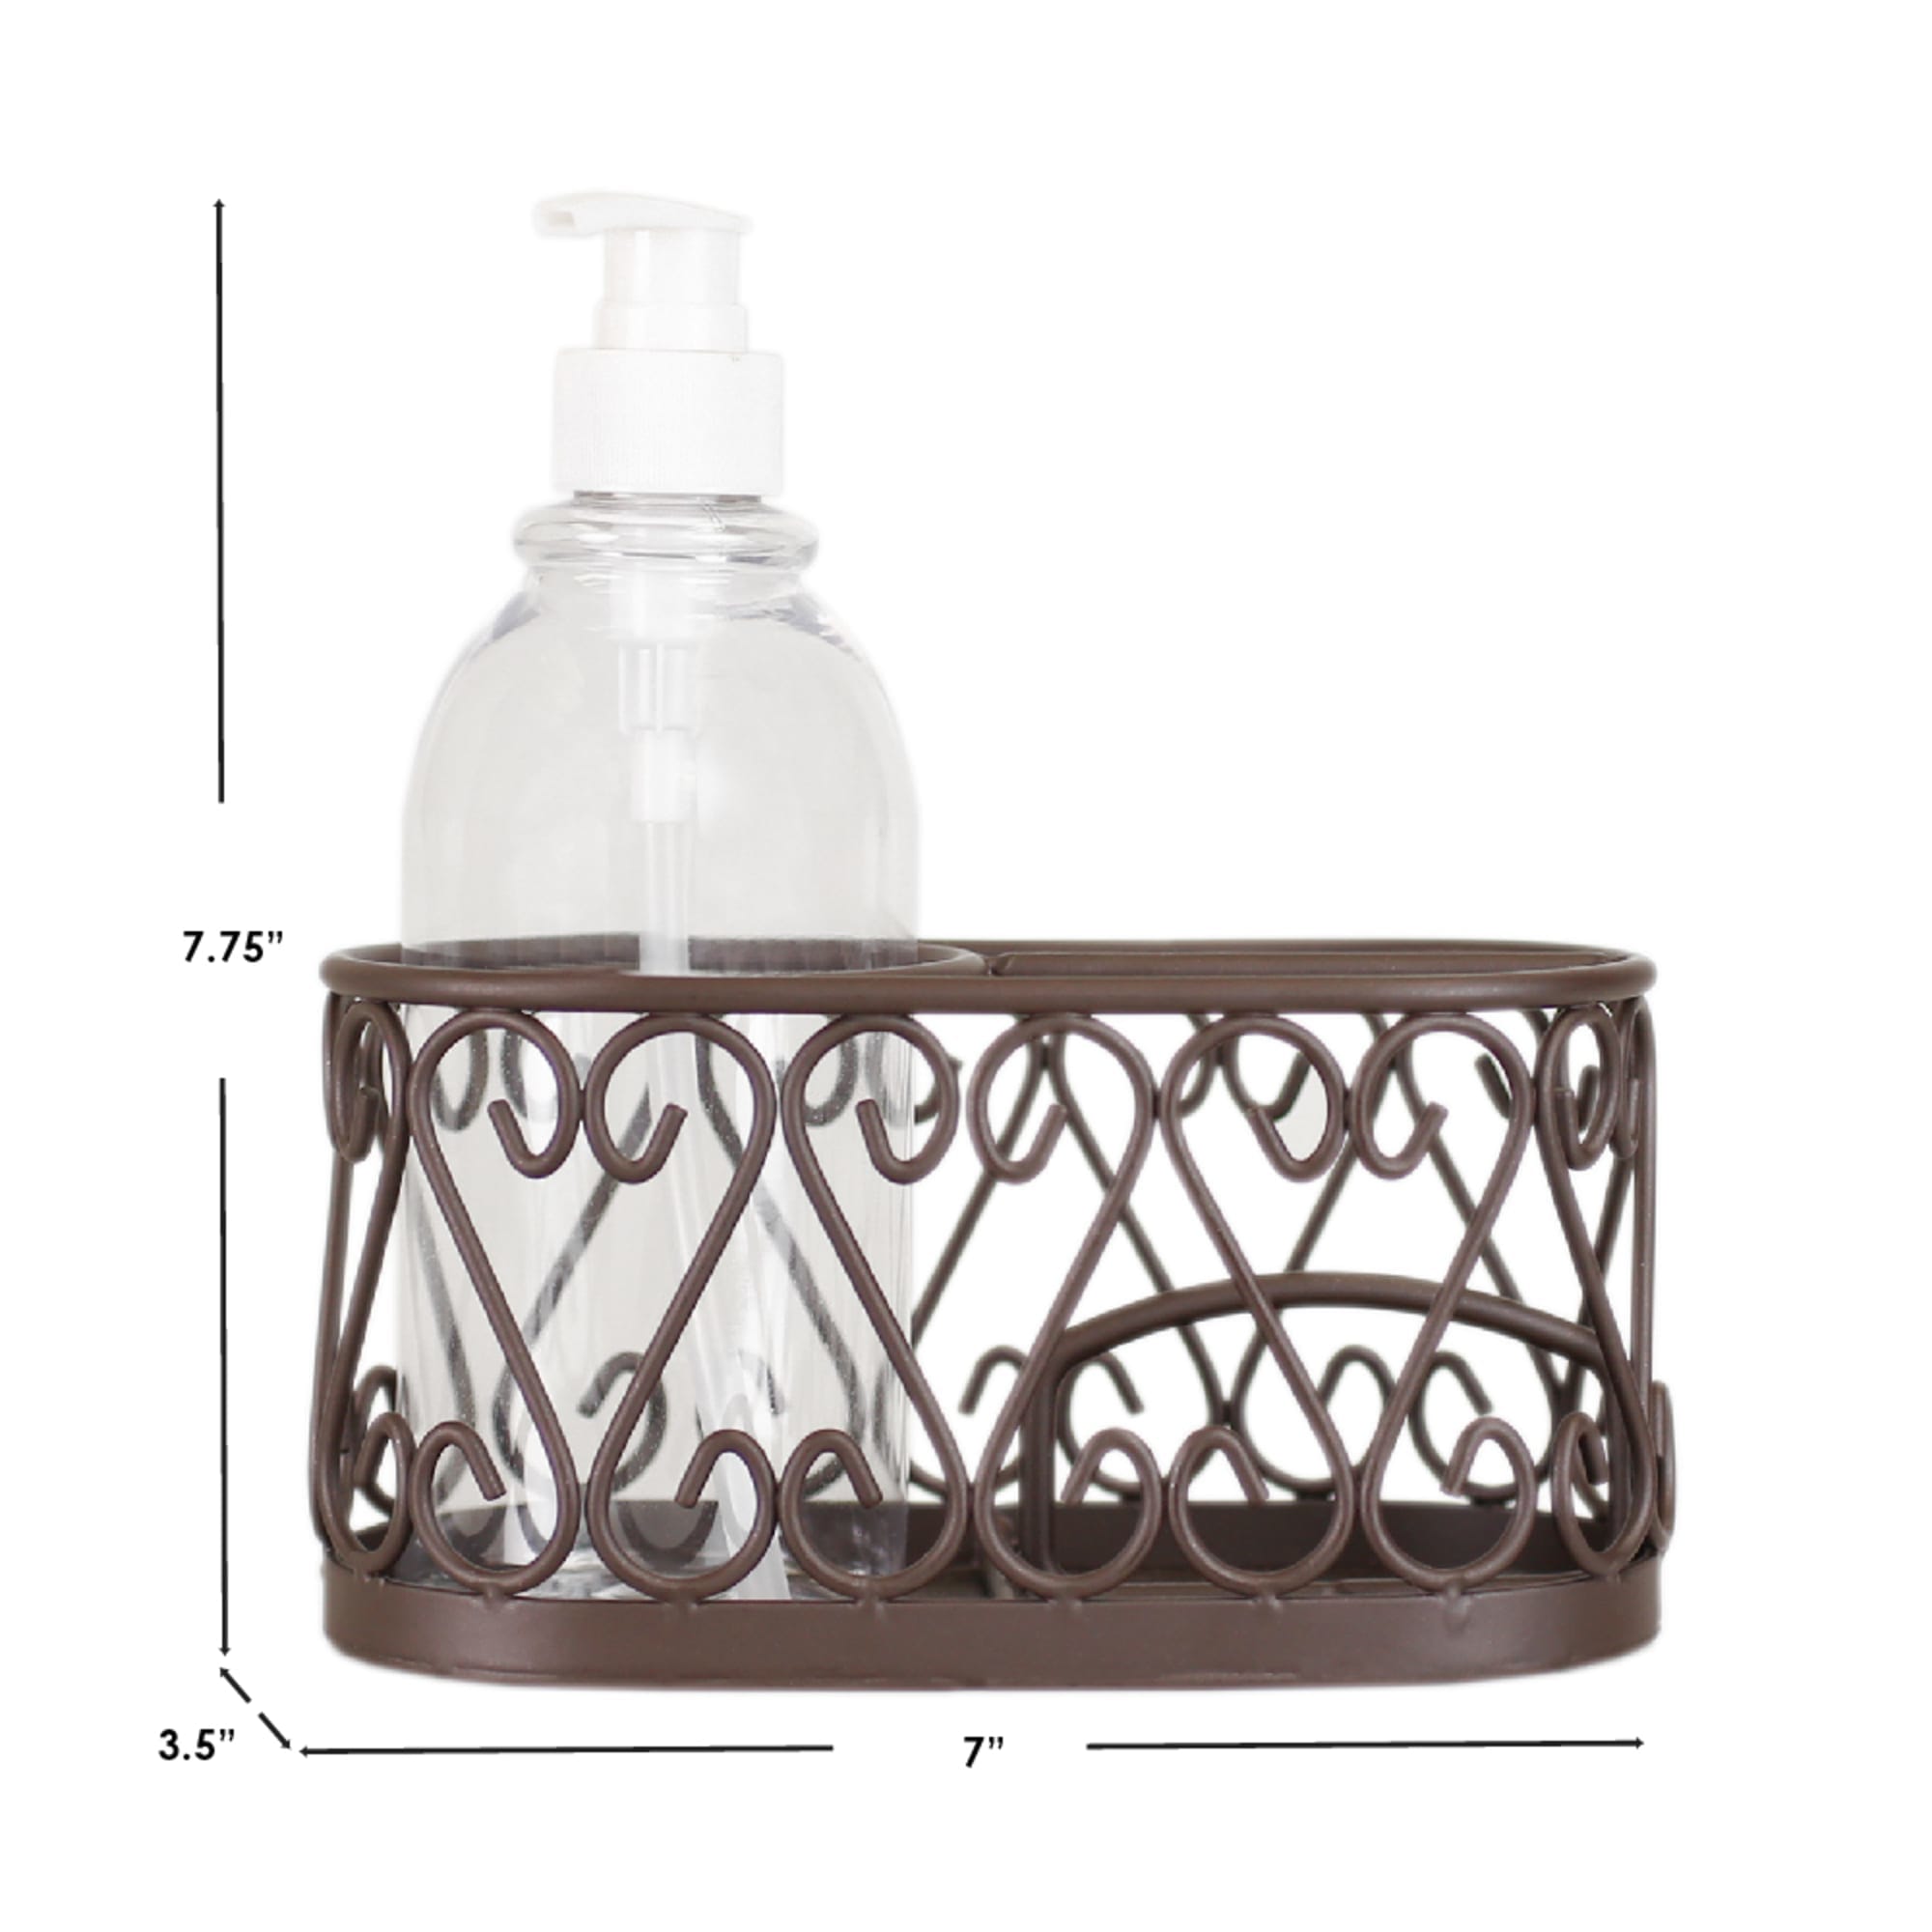 Home Basics Scroll Collection Soap Dispenser with Caddy, Bronze $8.00 EACH, CASE PACK OF 12